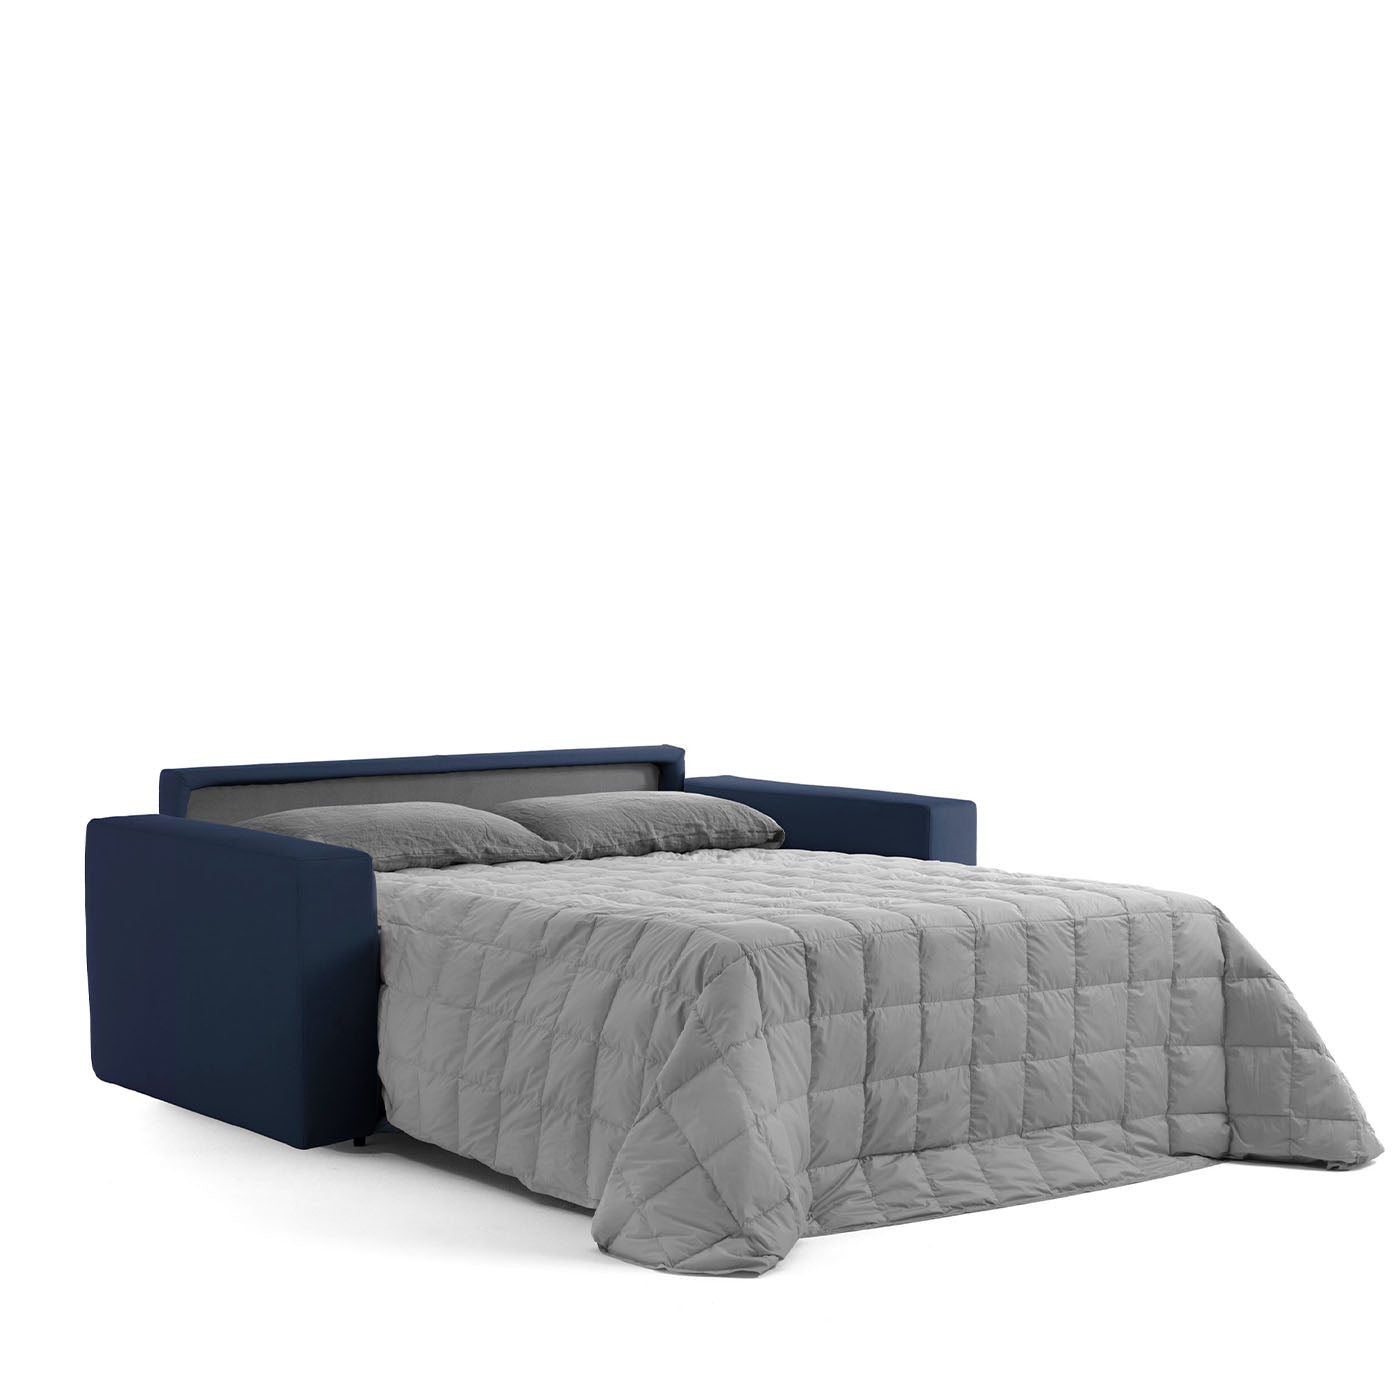 Almo Midnight-Blue Sofabed - Alternative view 1